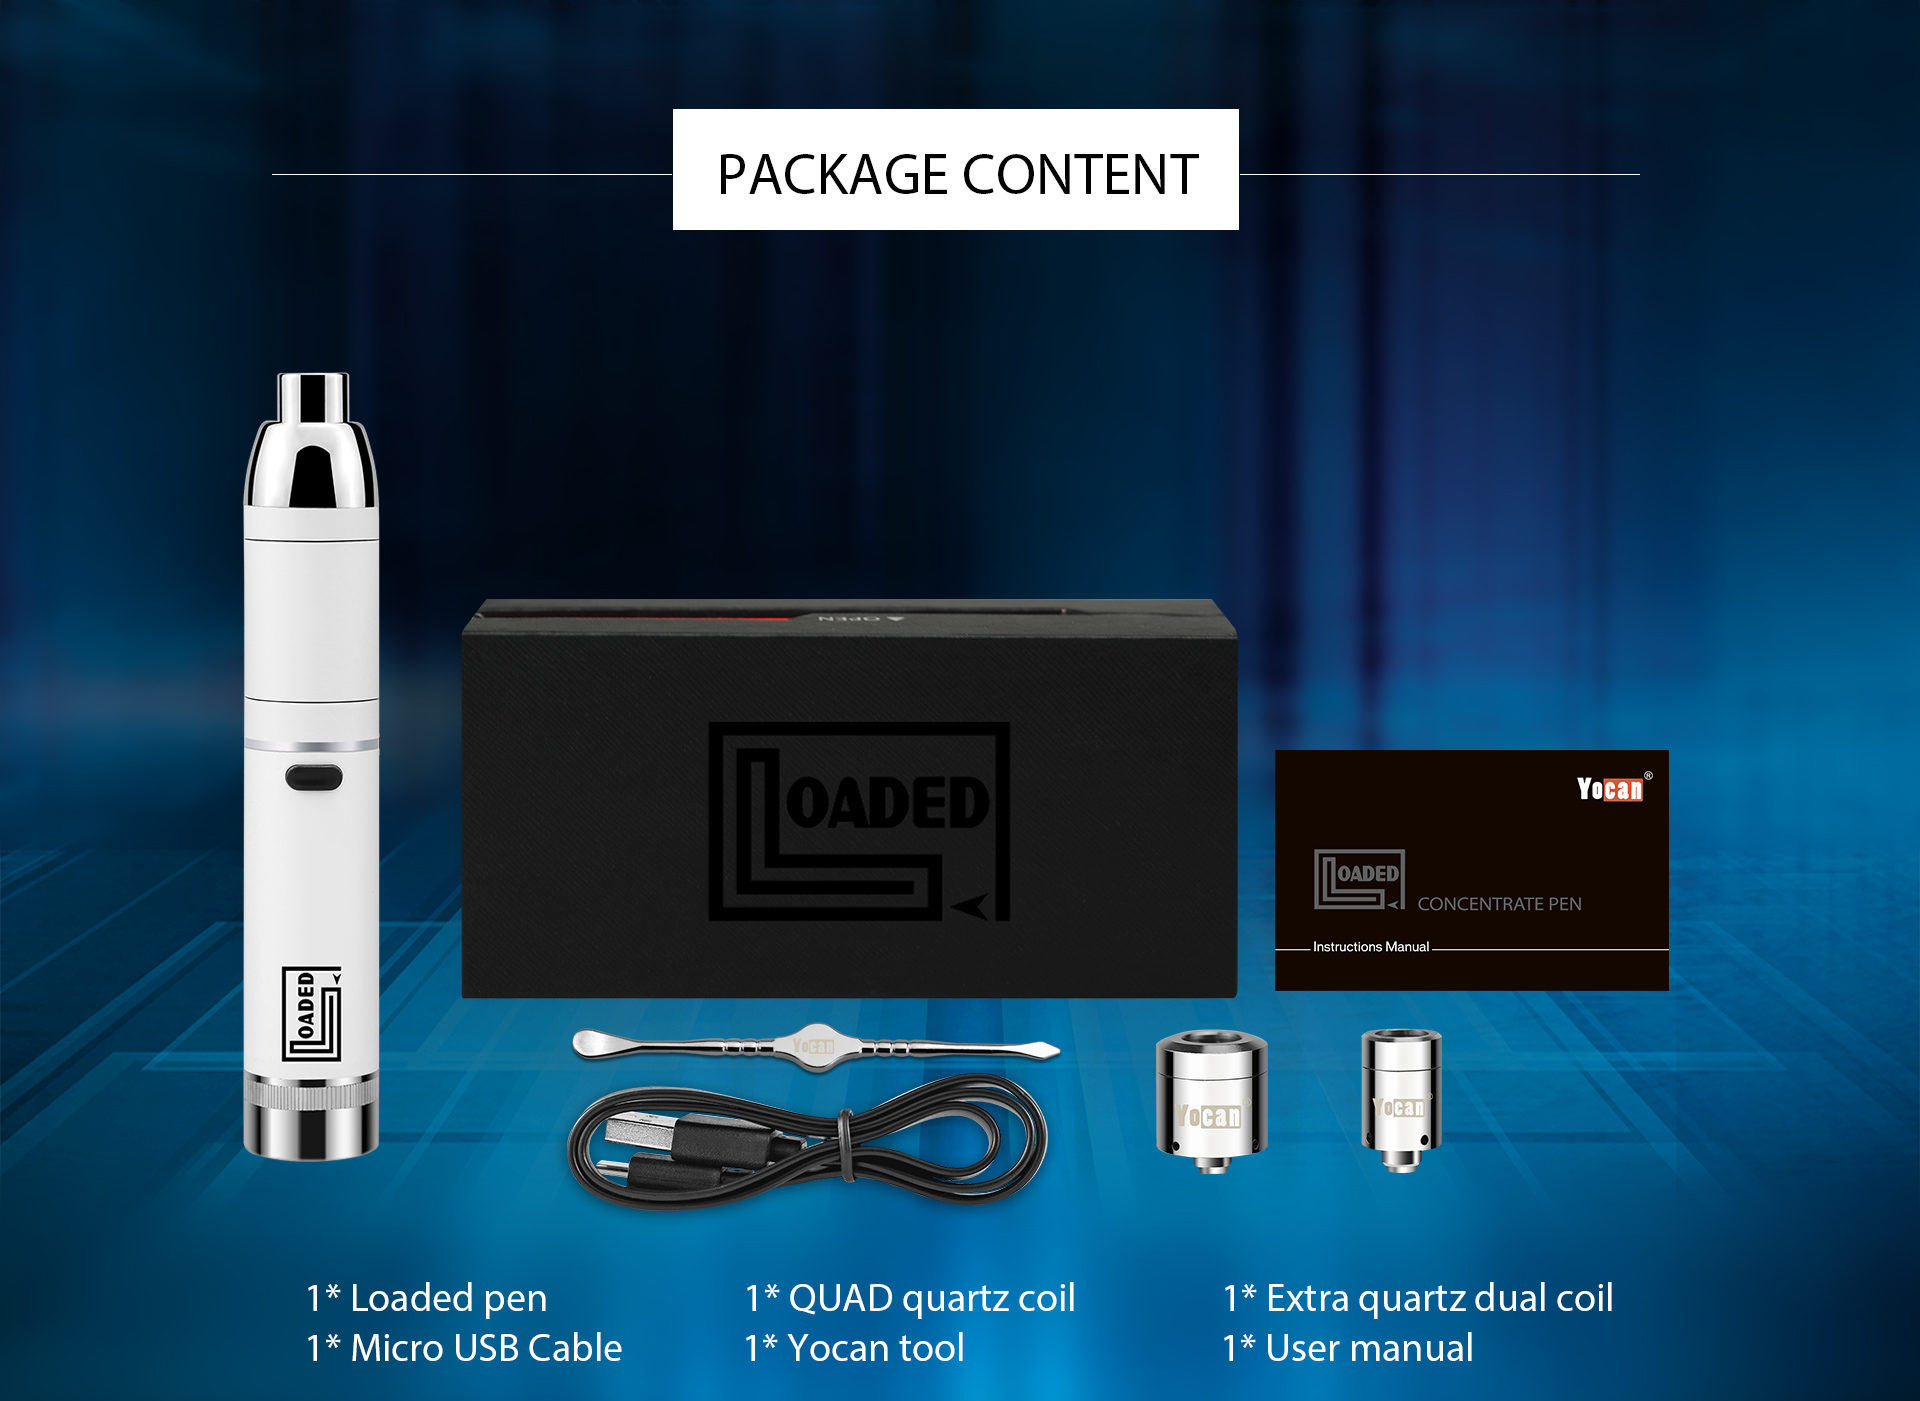 Yocan loaded package content.